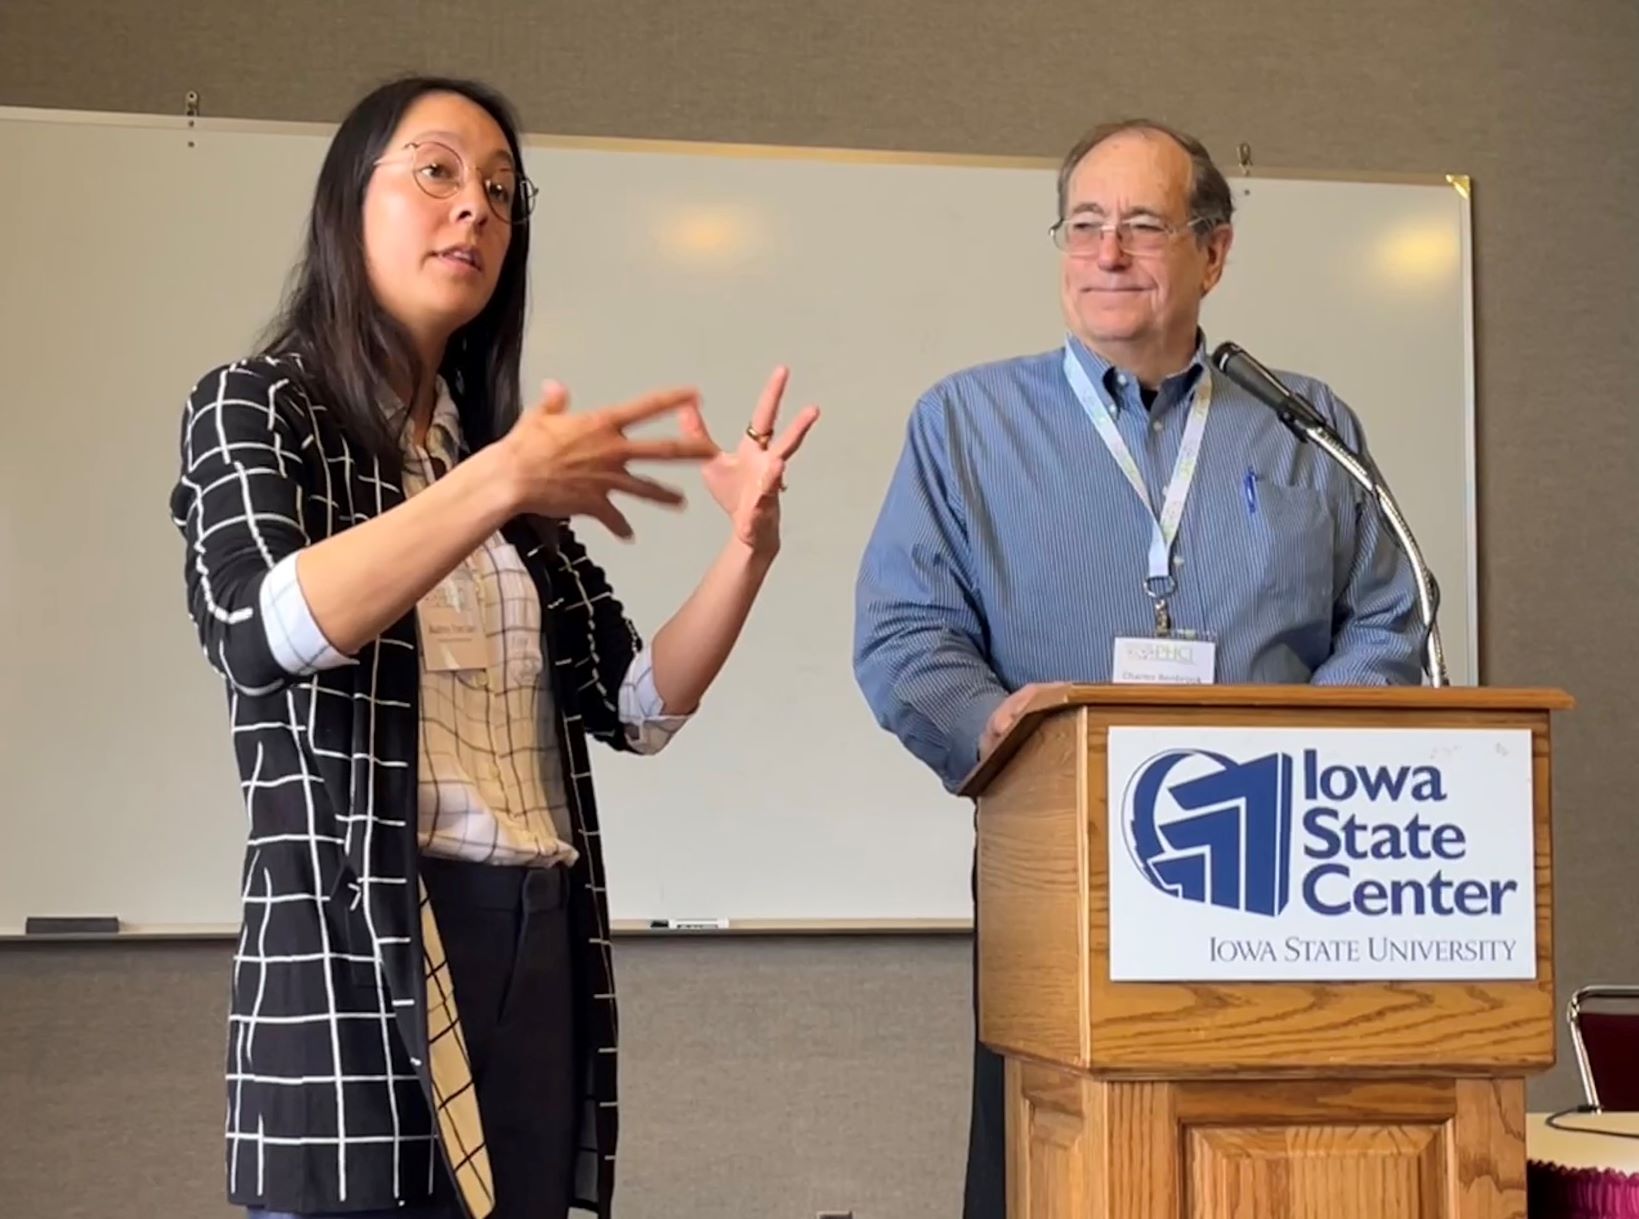 Better Late Than Never: Farmers, Ag Scientists and the Public Health Community Come Together in Iowa and Pay Tribute to a Sustainable Ag Pioneer